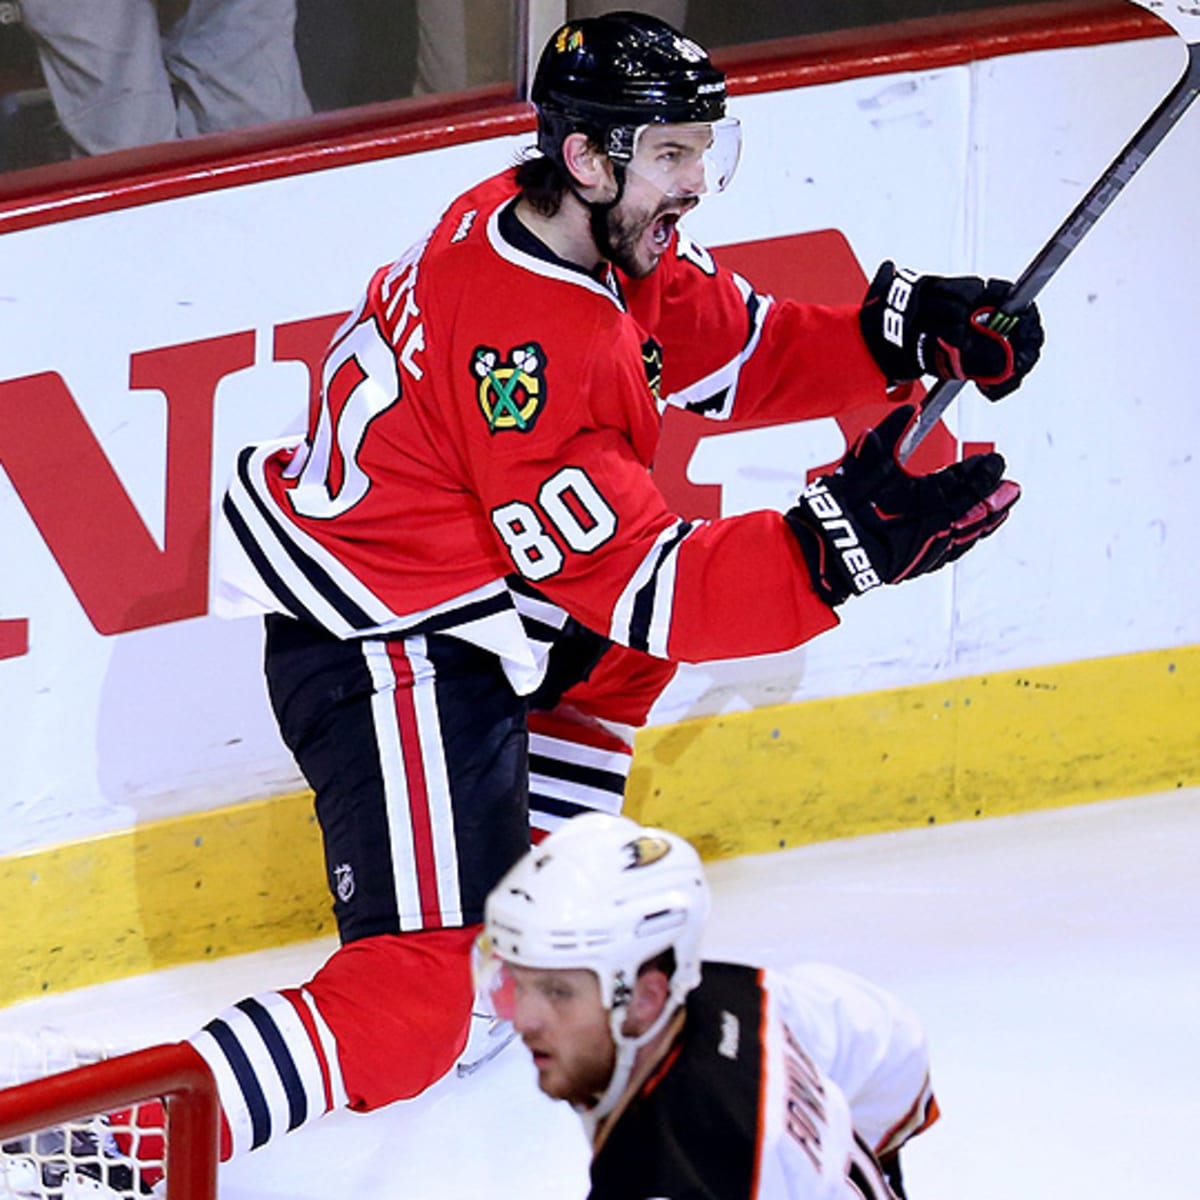 Blackhawks rookie Kane surpassed expectations including his own